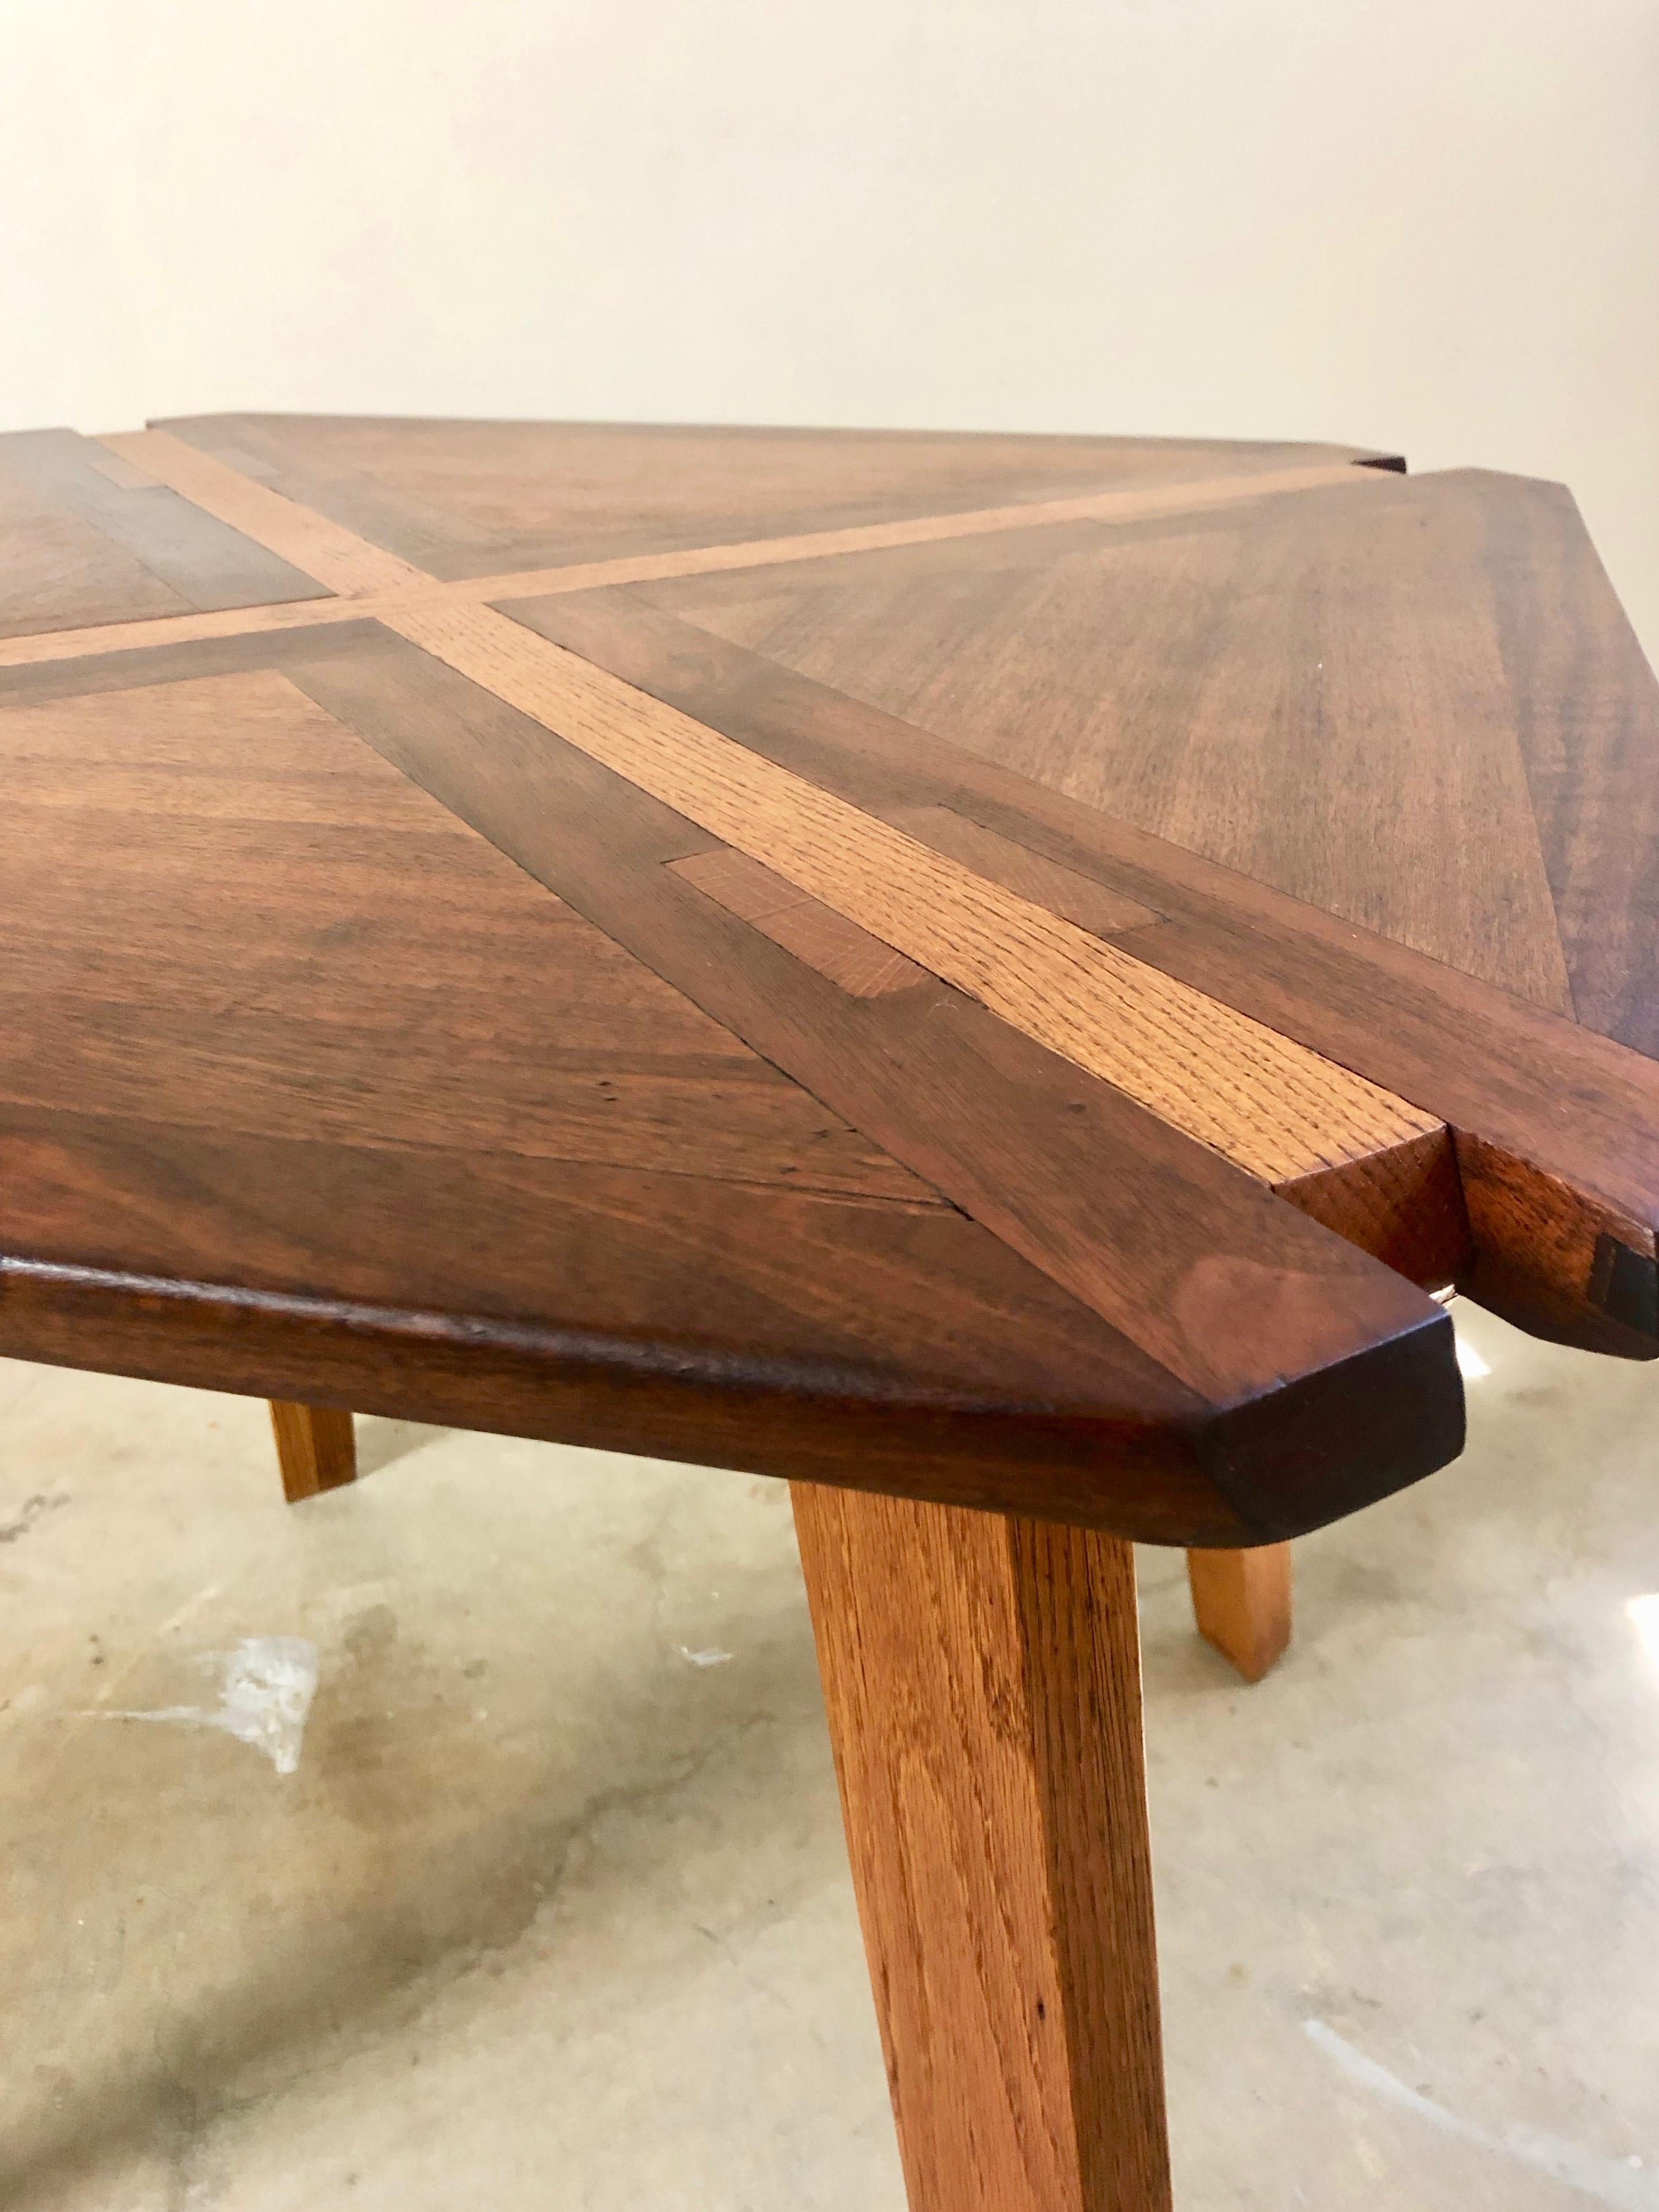 Studio Crafted Mixed Woods Dining Table / Game Table 2